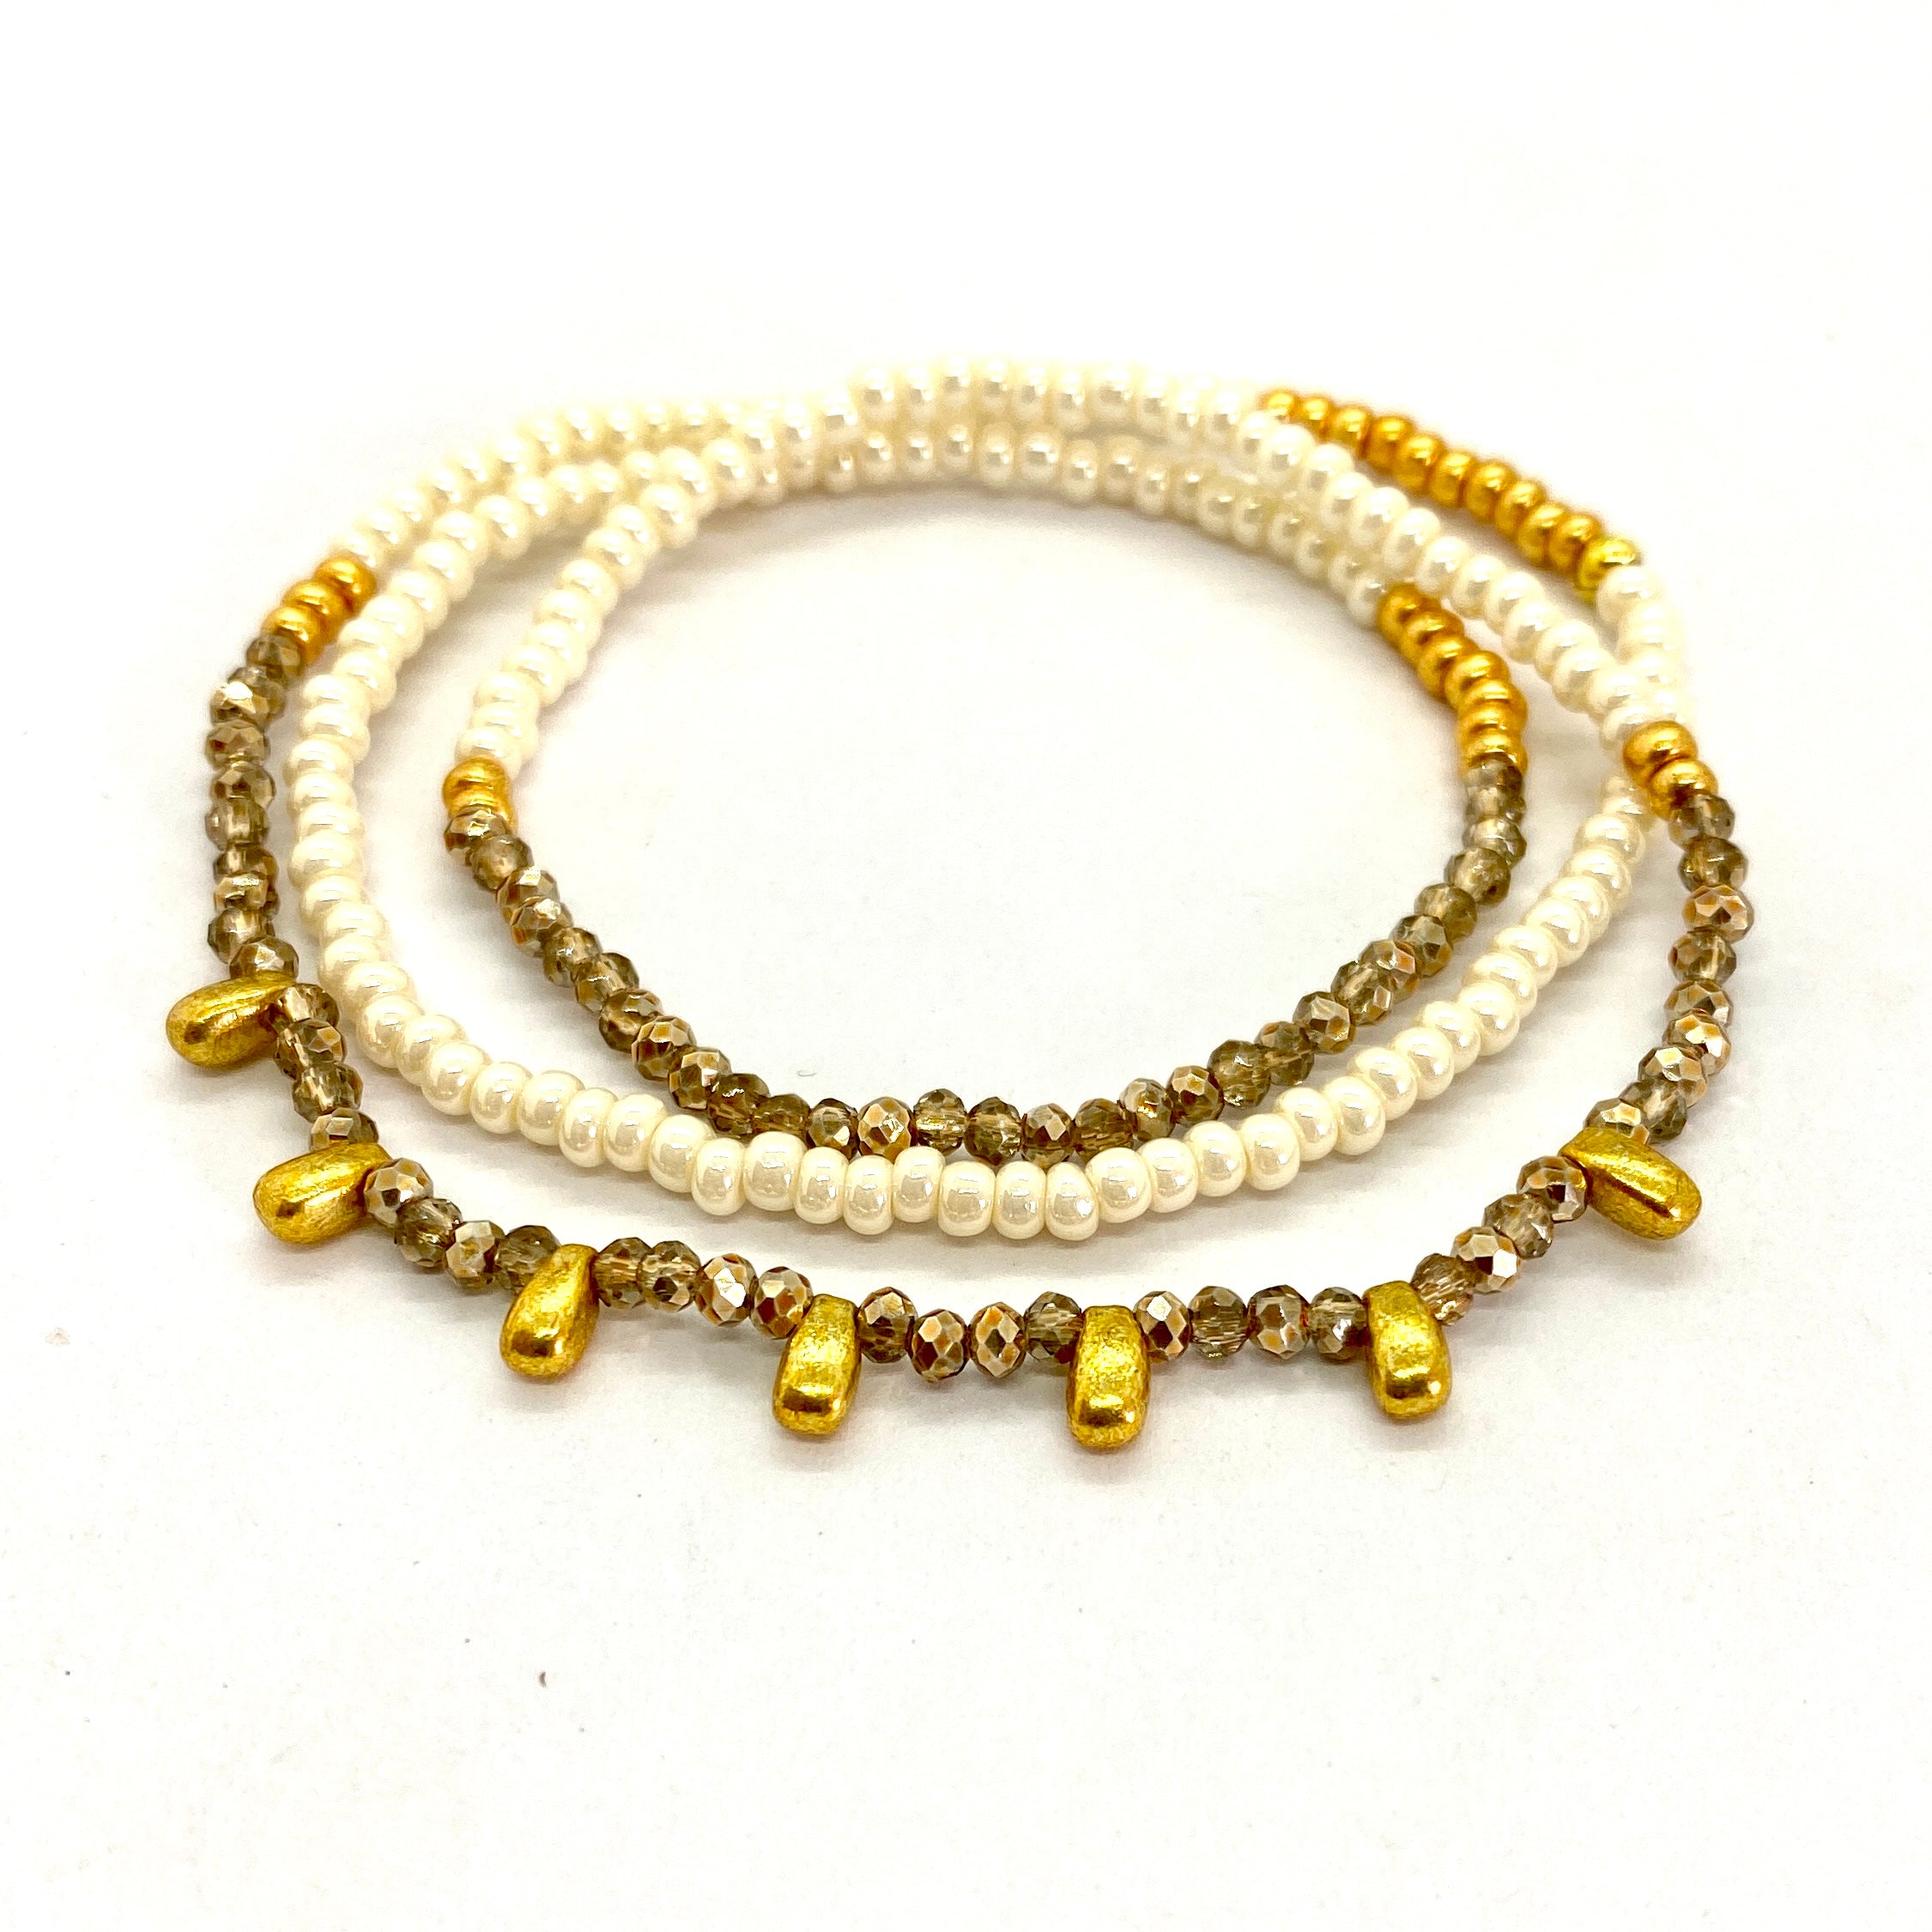 THE MAKERY TRIPLE WRAP BRACELET IN PEARL AND MOTTLE GOLD WITH GOLD DROPS